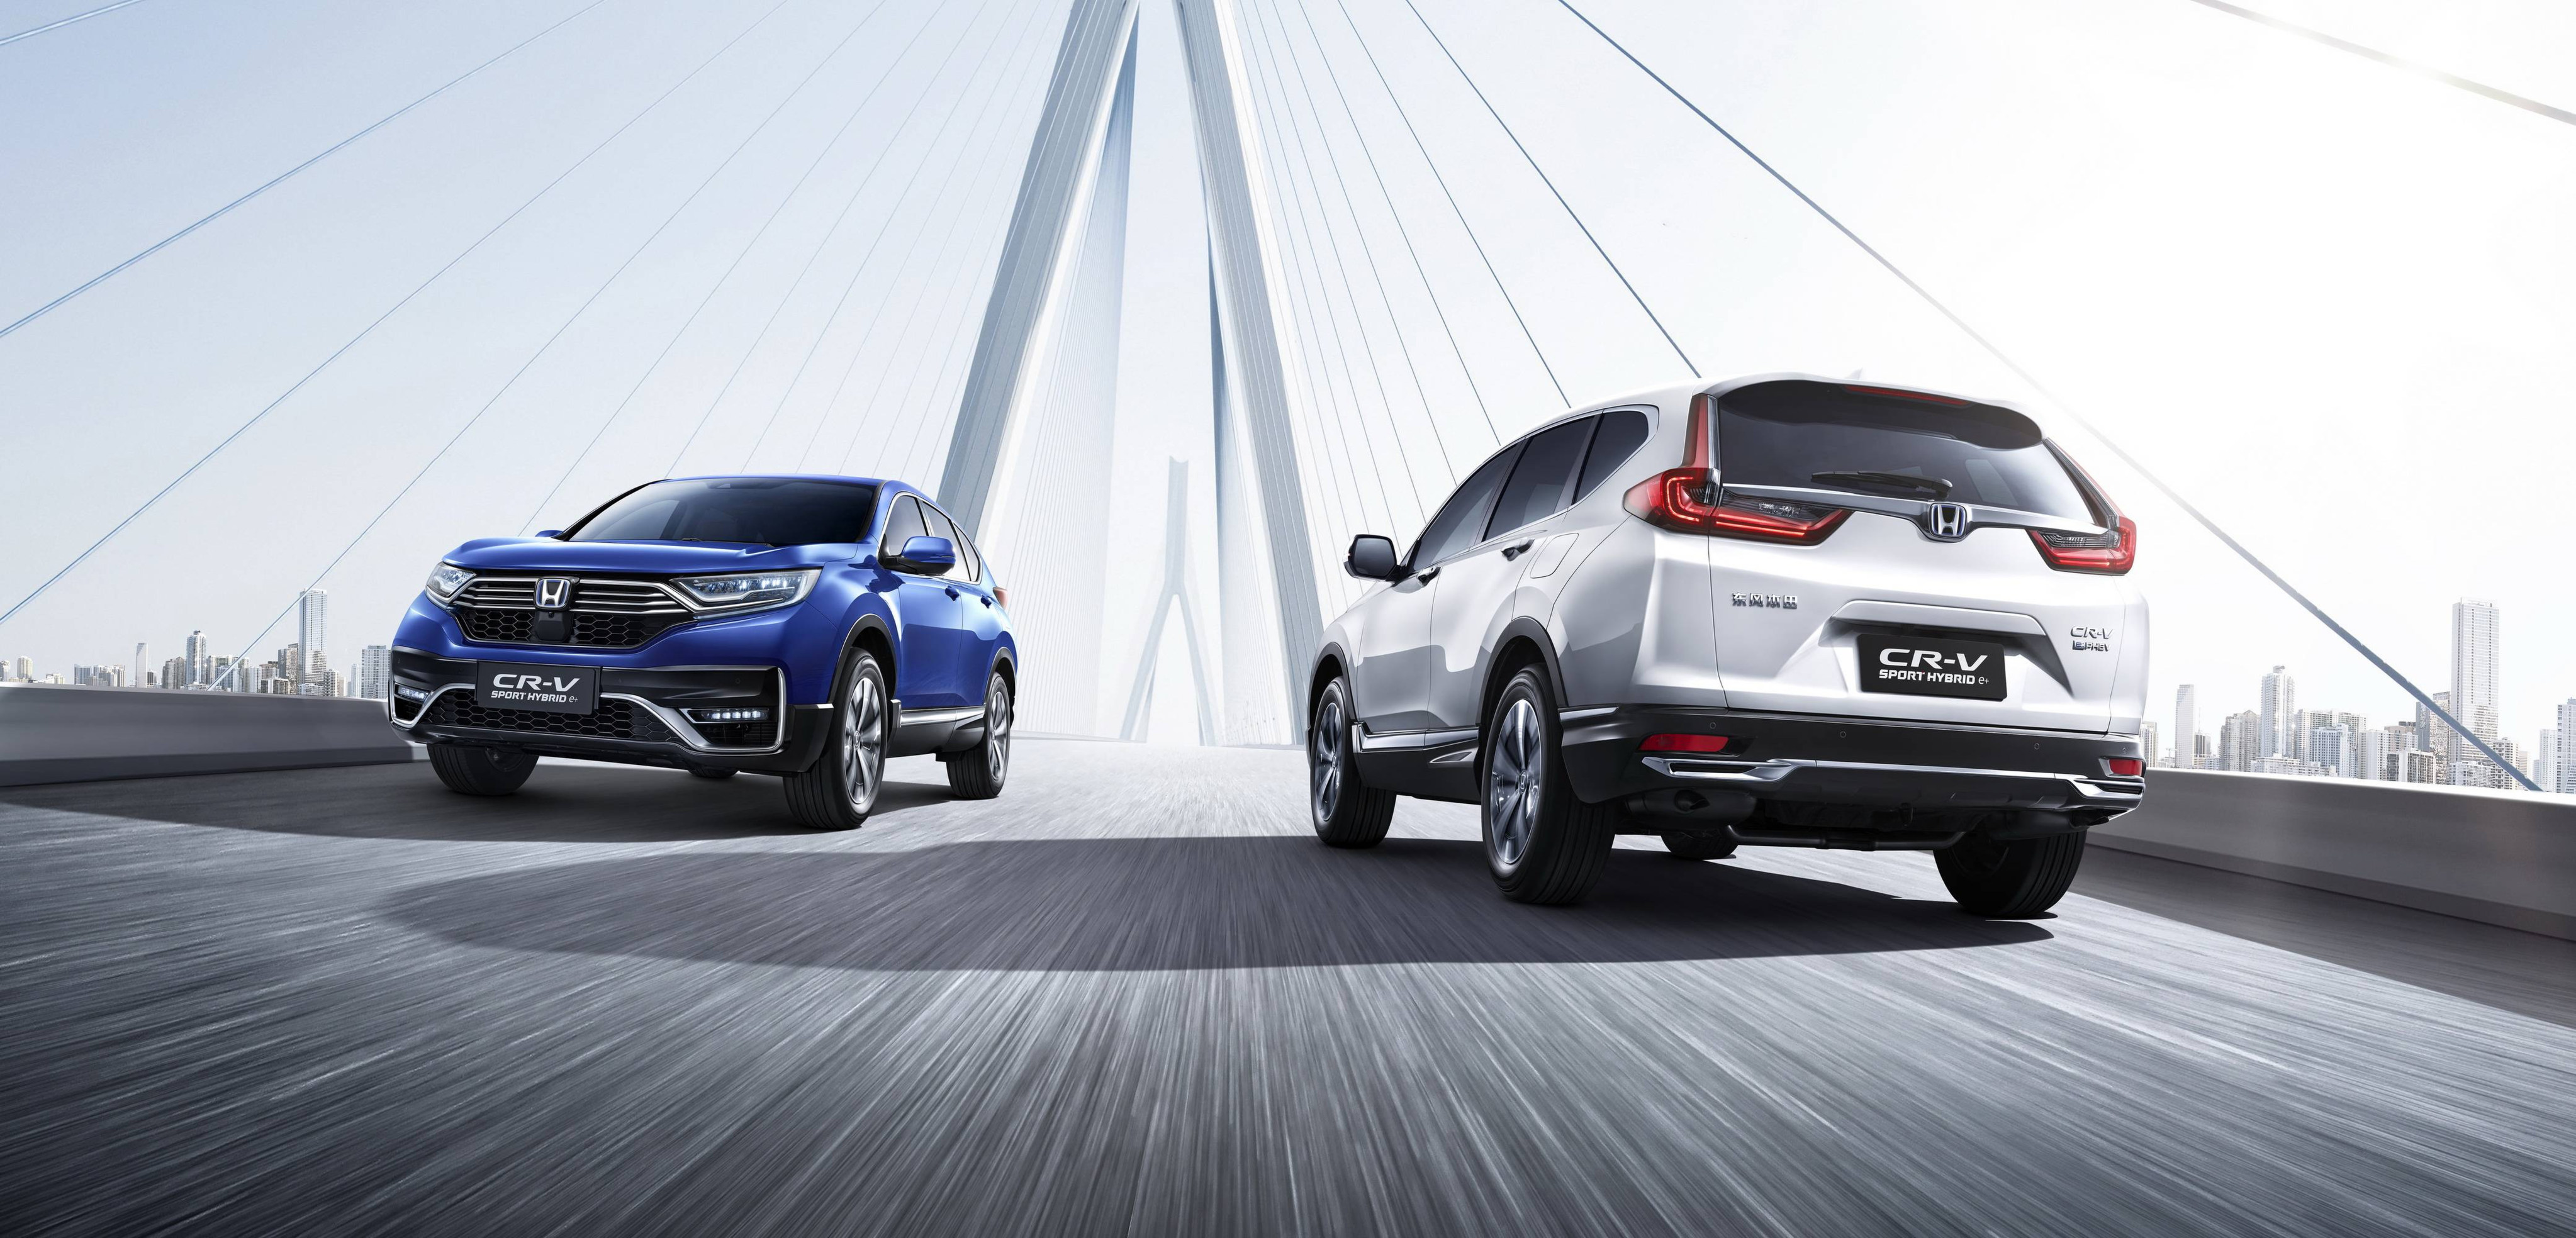 Dongfeng Honda Automobile, a 50-50 joint venture between the Japanese company and its Chinese partner Dongfeng Motor Group, manufactures Honda’s CR-V, among other models. Photo: Dongfeng Honda